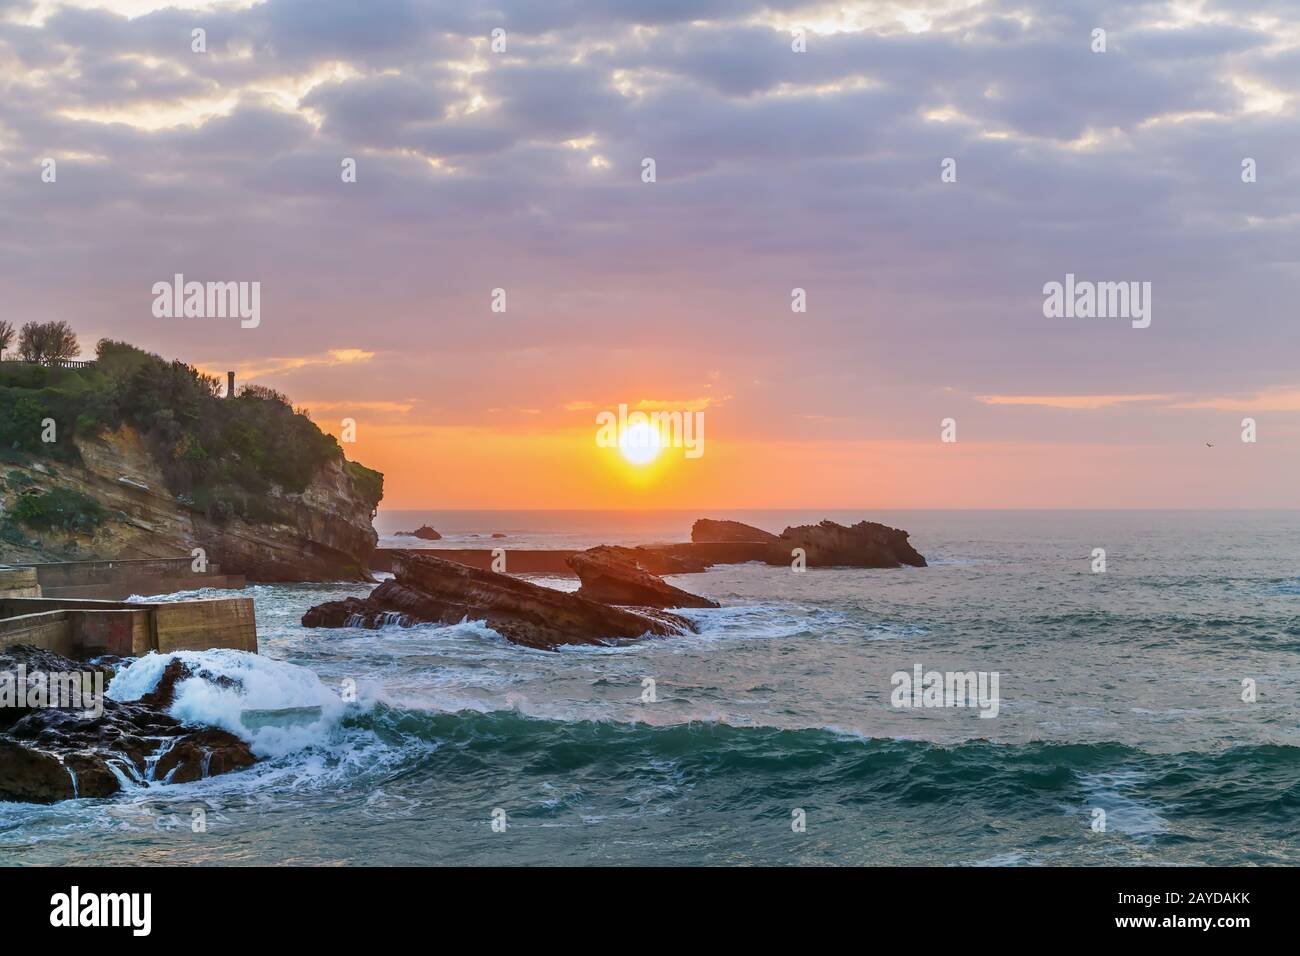 Sunset in Bay of Biscay, Biarritz, France Stock Photo